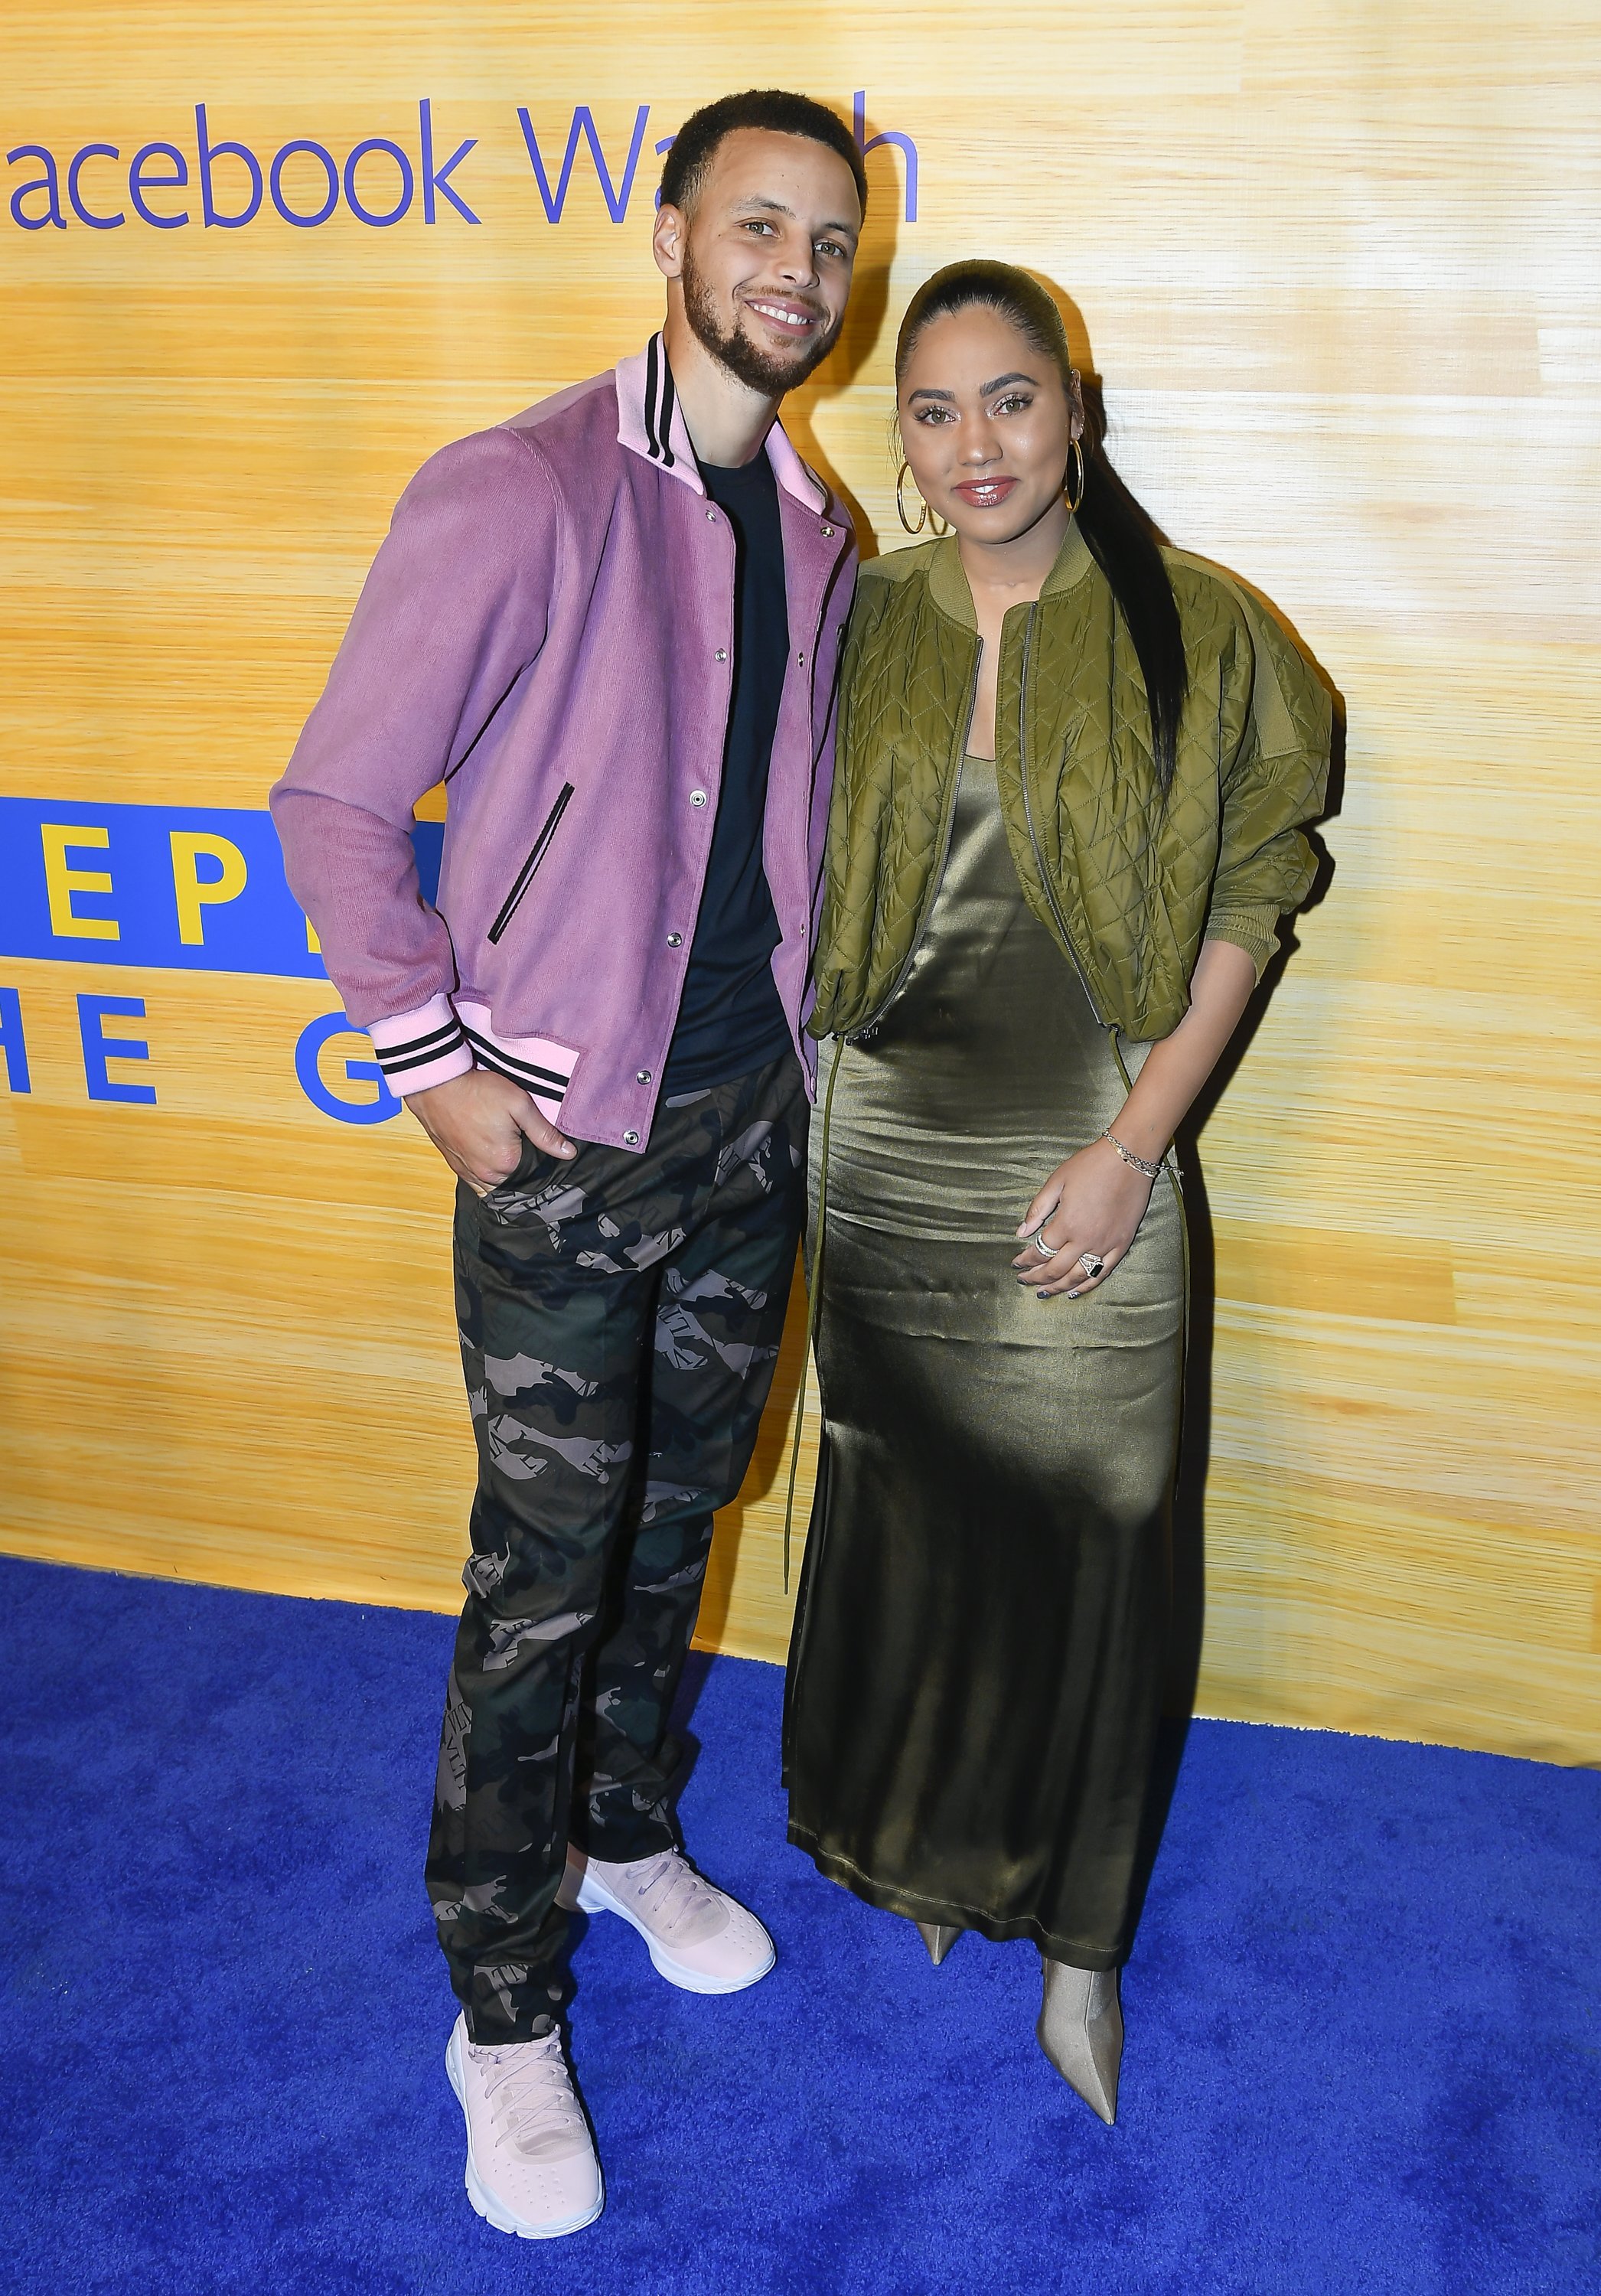 Stephen Curry and Ayesha Curry attend the "Stephen Vs The Game" Facebook Watch Preview at 16th Street Station on April 1, 2019 in Oakland, California | Photo: Getty Images